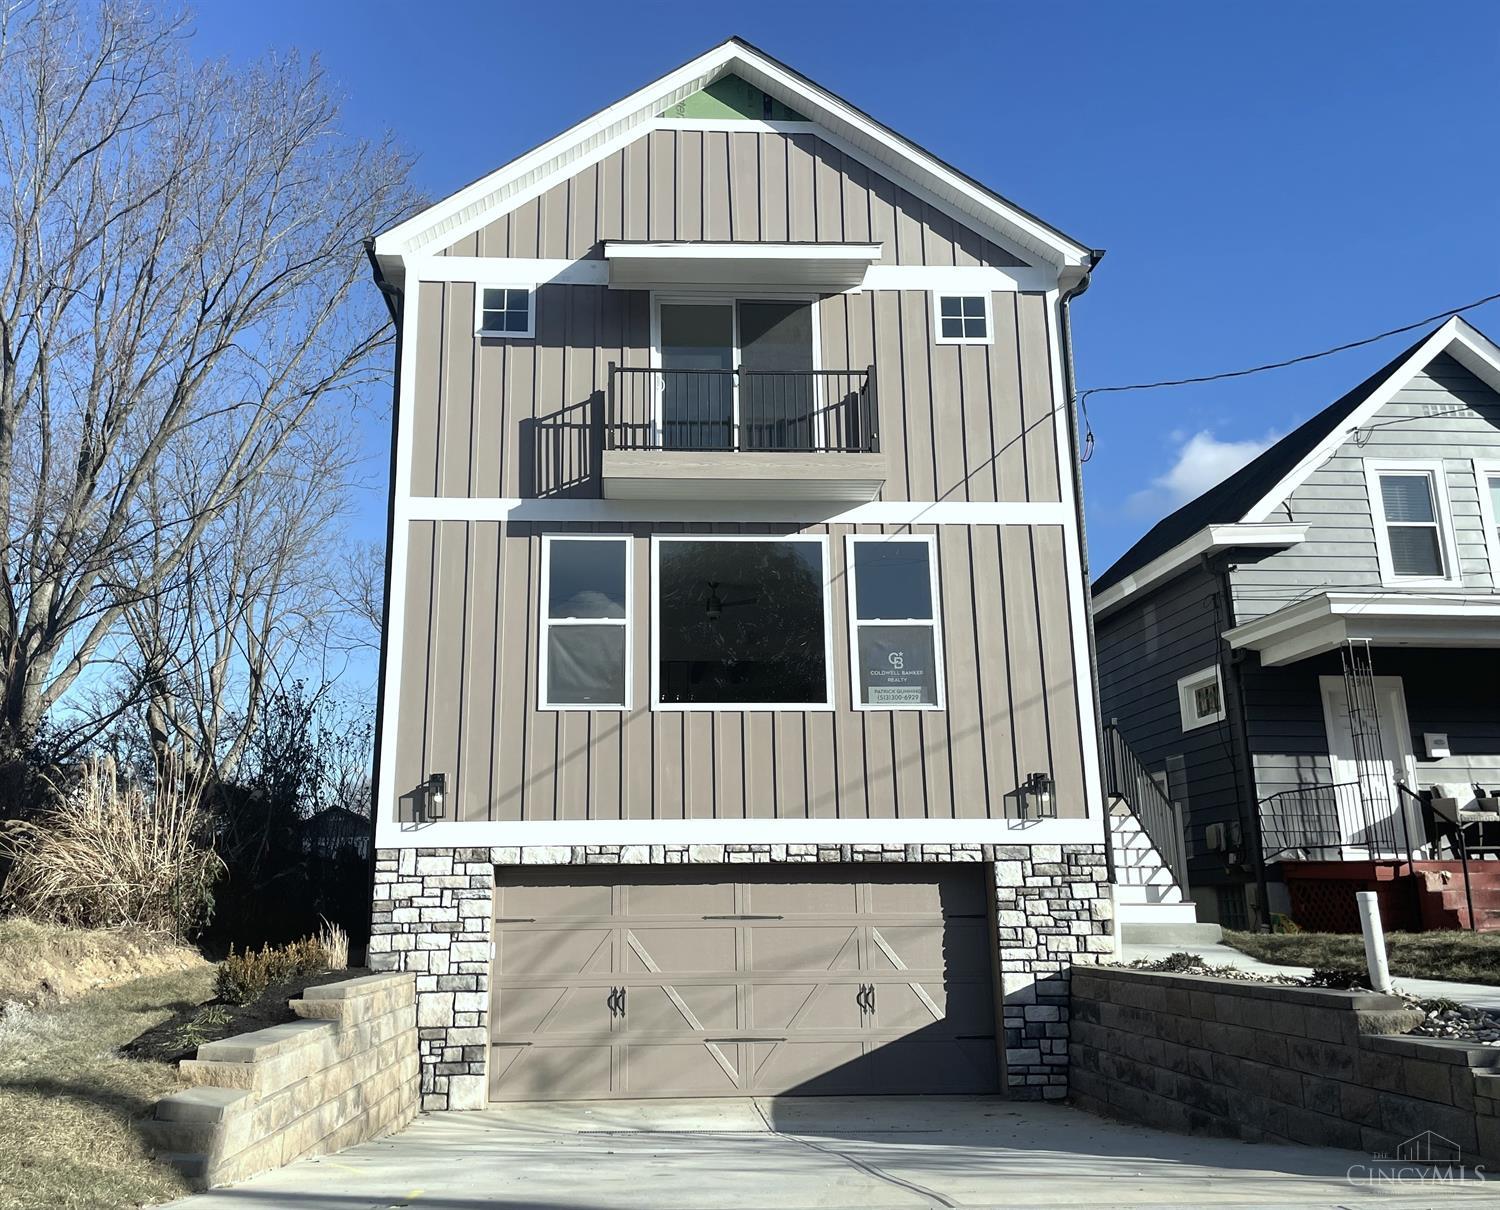 Superb location of this brand new home by Ashford Homes. Walk to Rookwood & Oakley Square with ease. LEED Gold 15 year tax abatement eligible. Save estimated $12,000/yr in prop taxes. 2,710 sqft open concept floor plan. 9 ft ceilings in lower and 1st flr. Kitchen walks out to trex deck and spacious backyard. Enjoy the ease of New Construction living in charming Oakley.